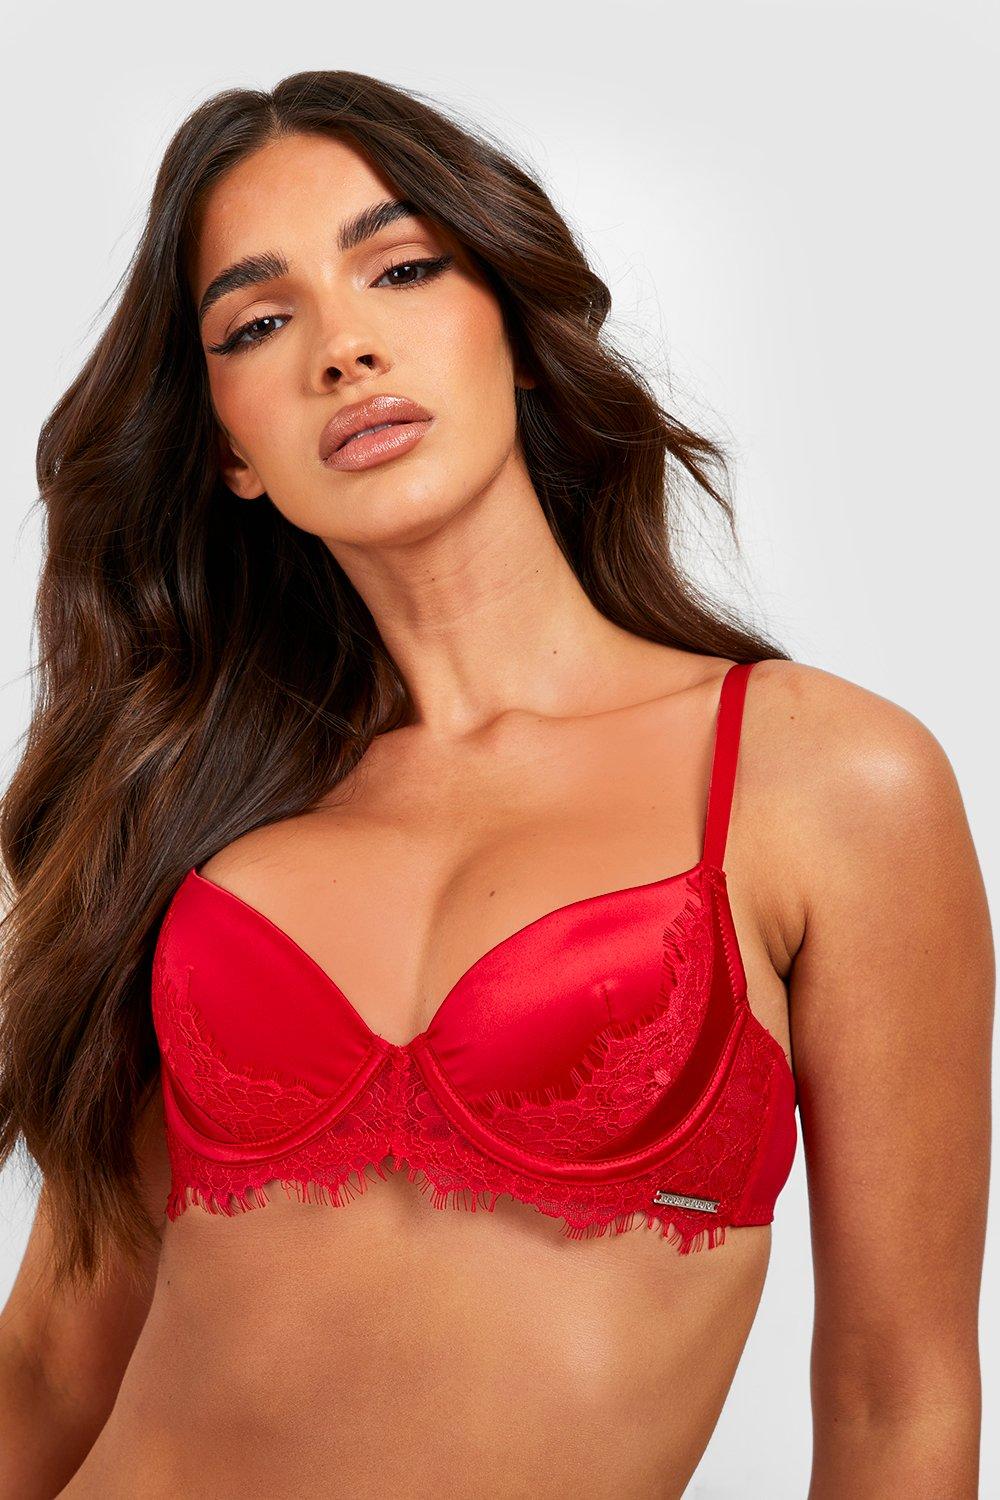 Buy Smooth Satin Lace Bra Non Padded cups With Underwire 34-42 B, C, D, DD  - Fast UK Delivery